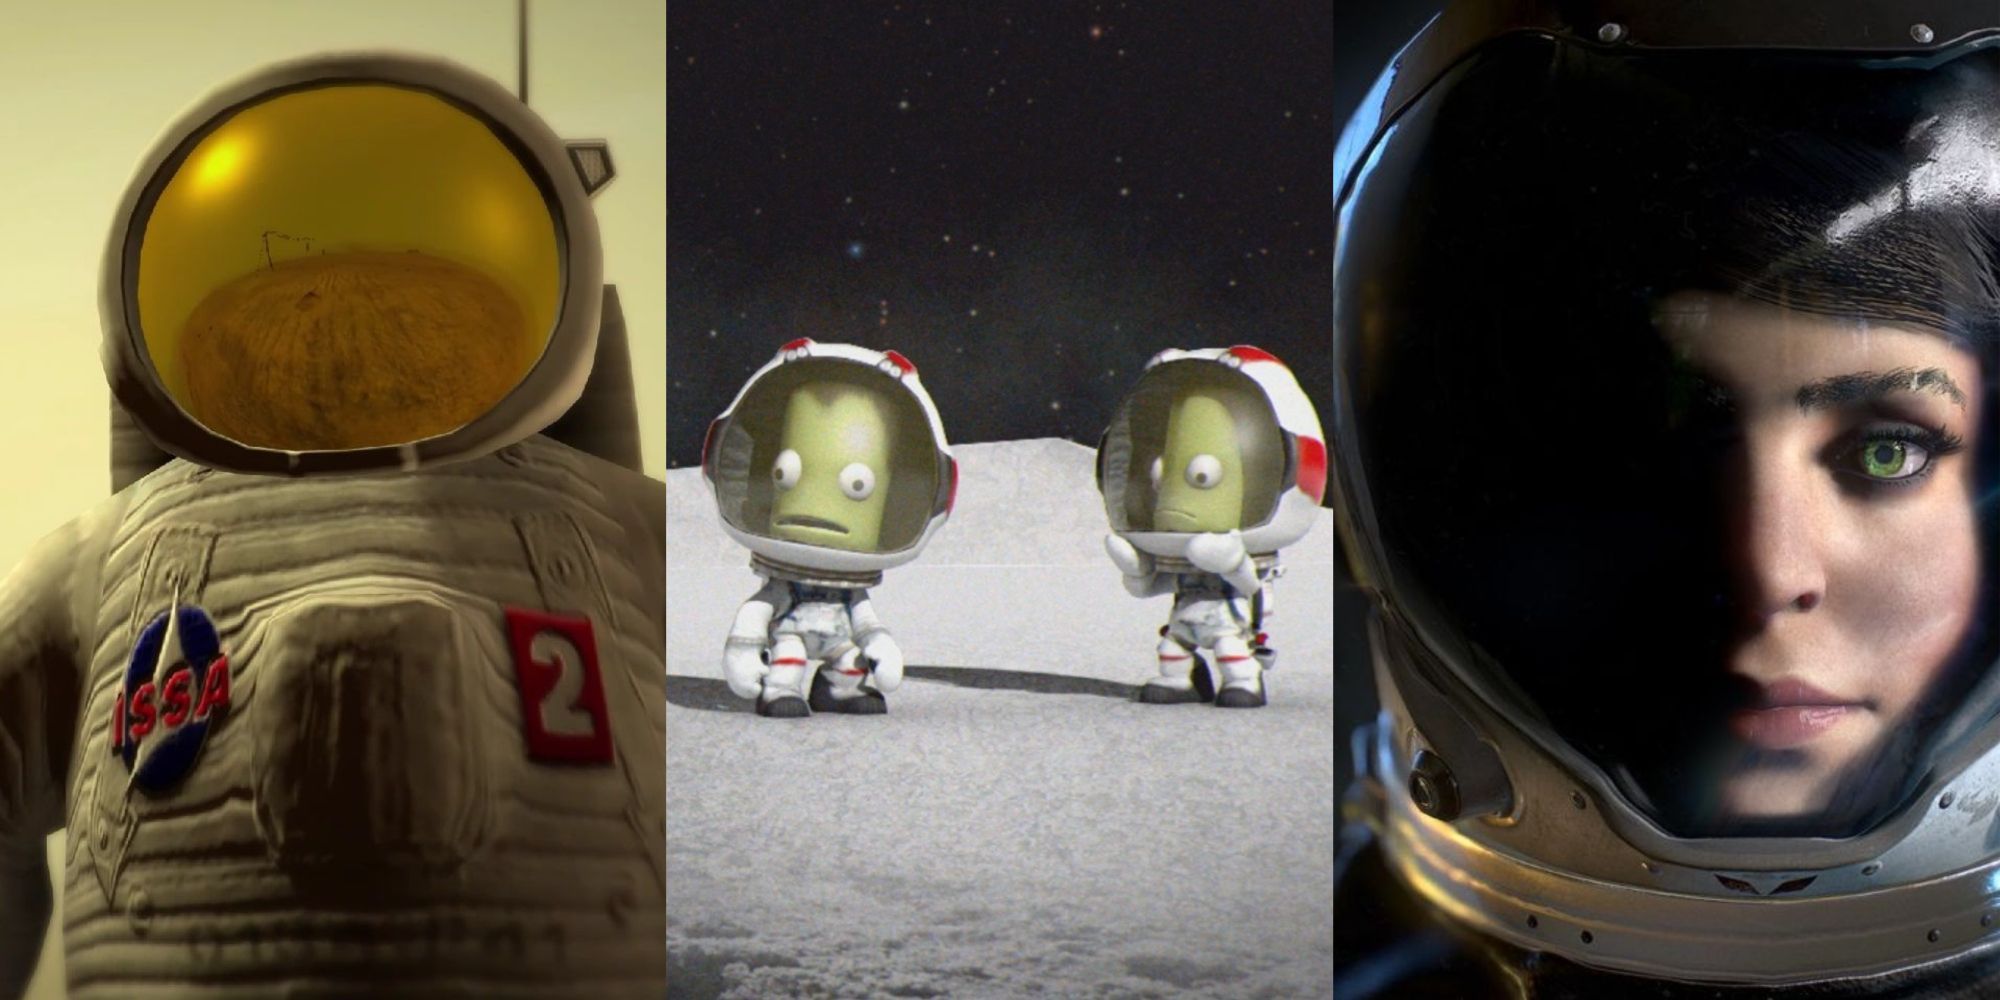 Collage of the main gold-visored astronaut from Lifeless Planet, two Kerbals in space suits on the moon, and a close-up of Ava Turing in her helmet.